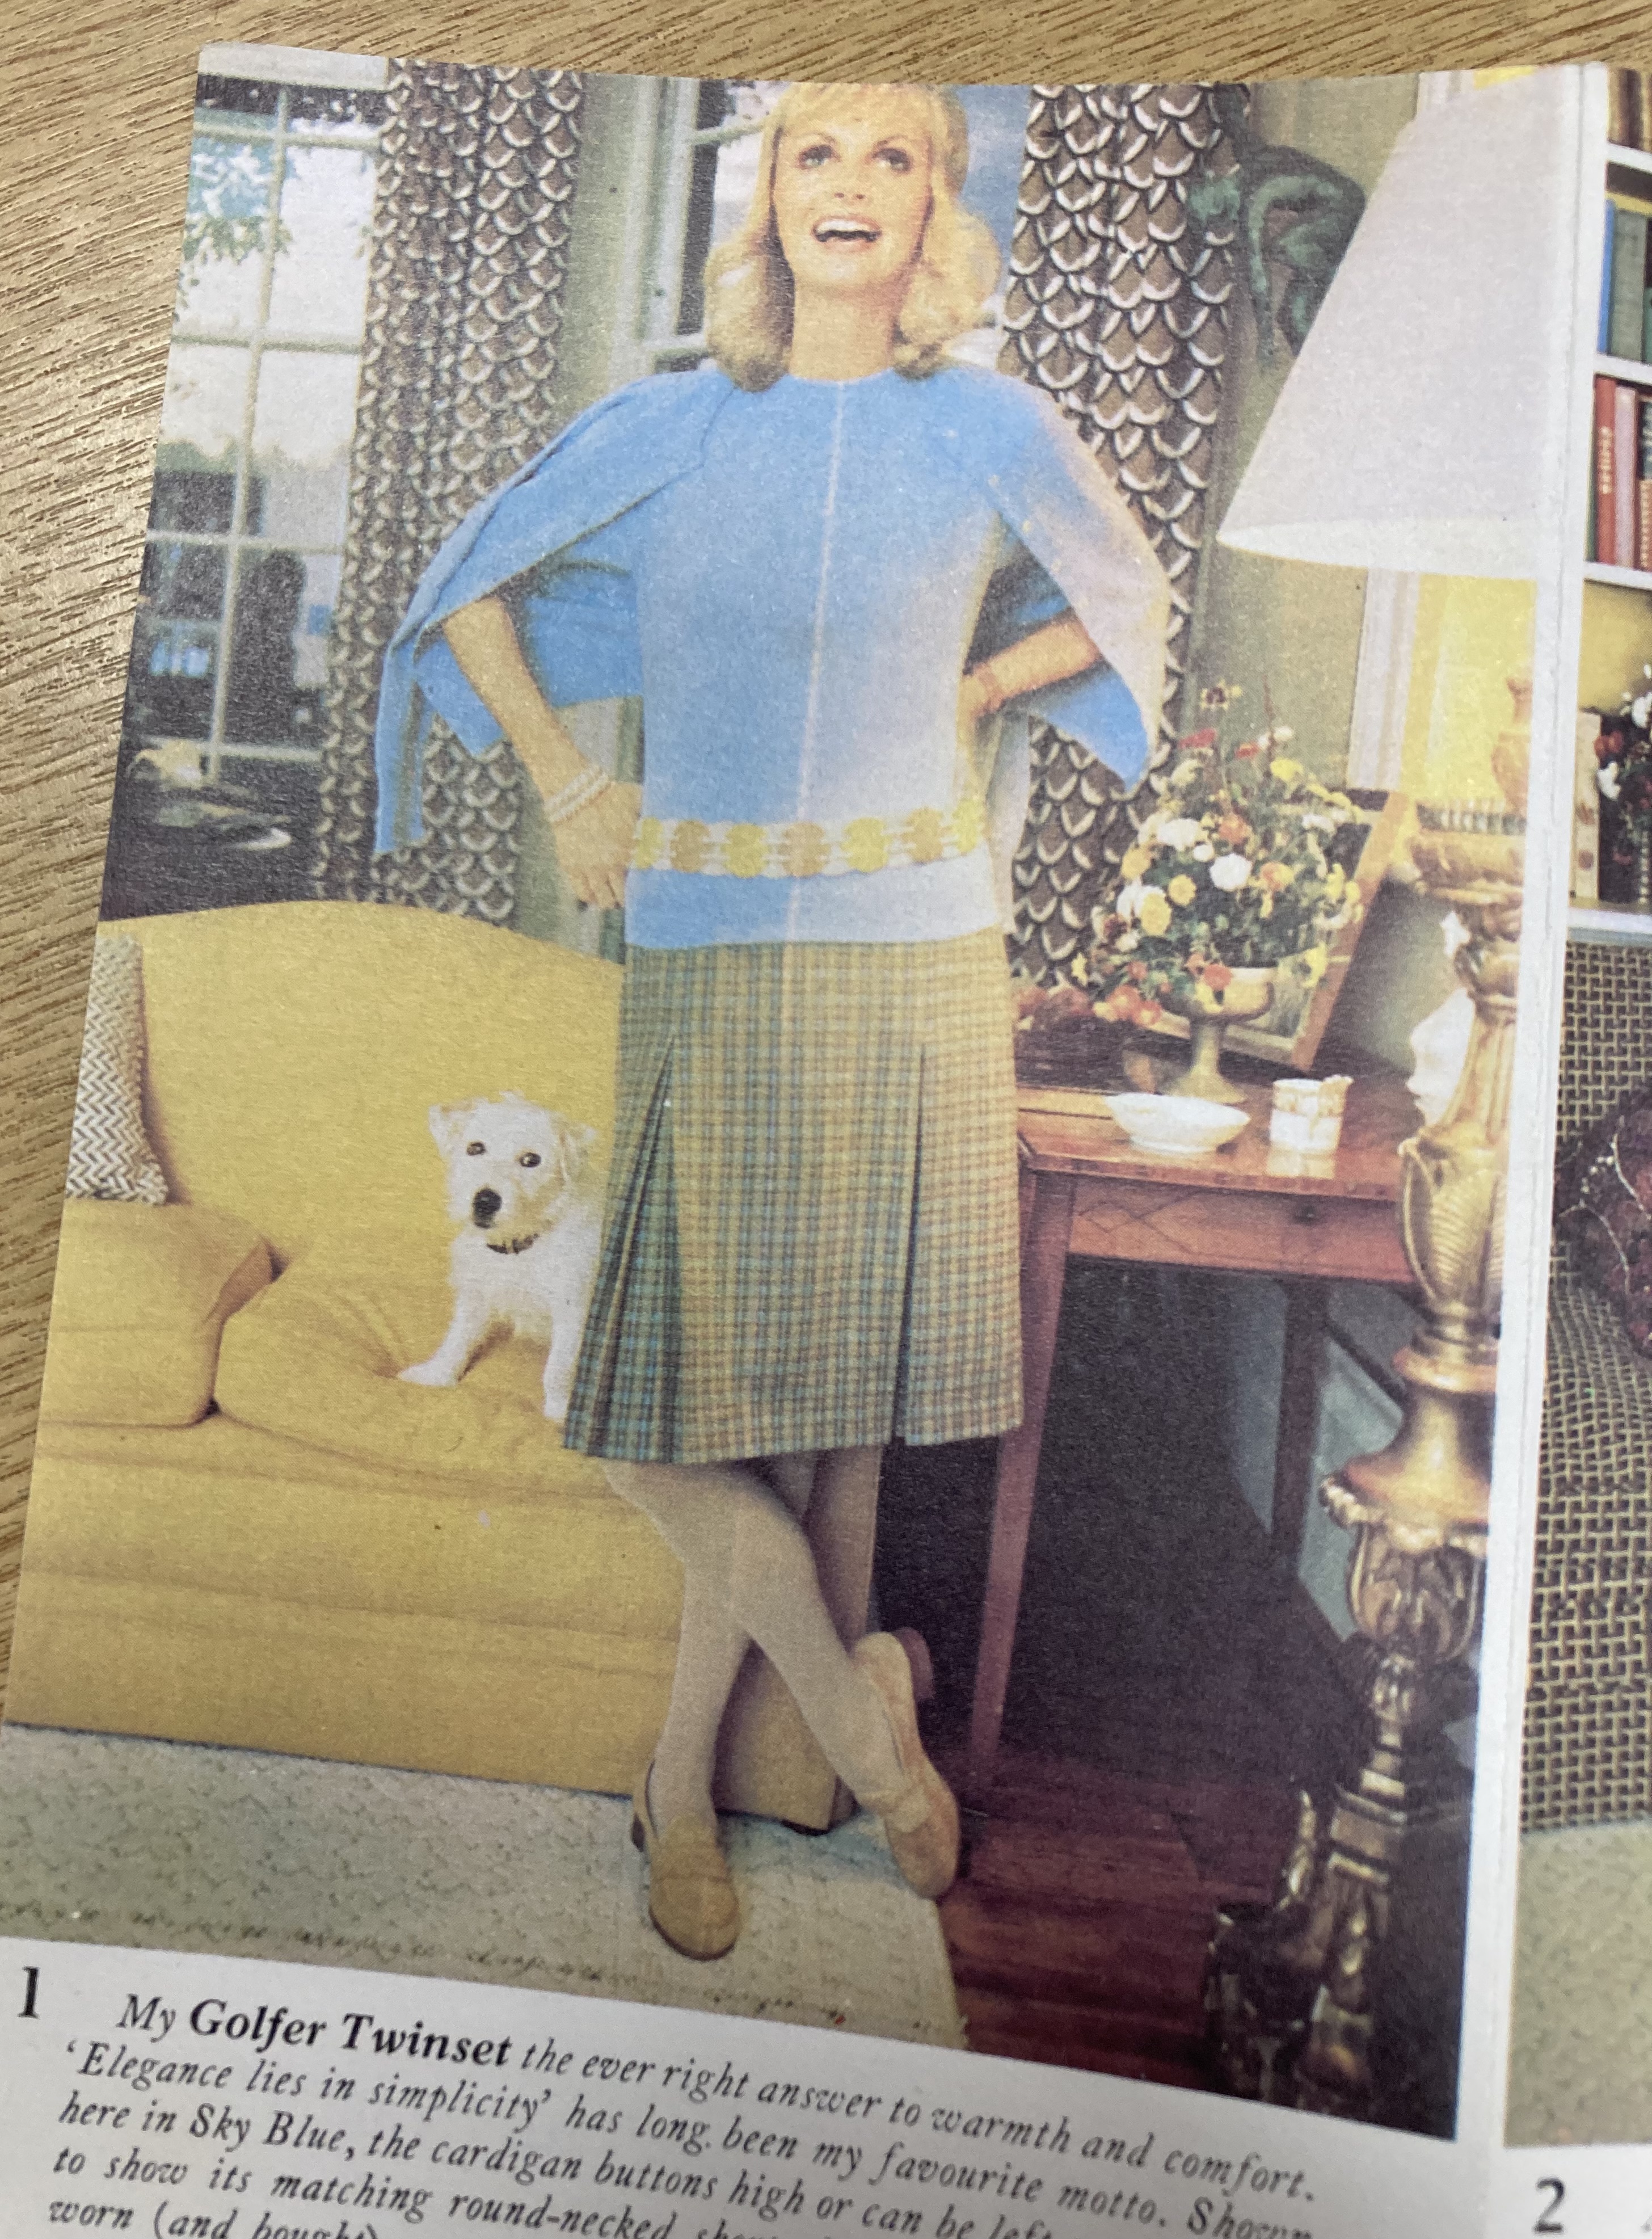 Photograph from inside a brochure showing a women in knitted jumper and skirt